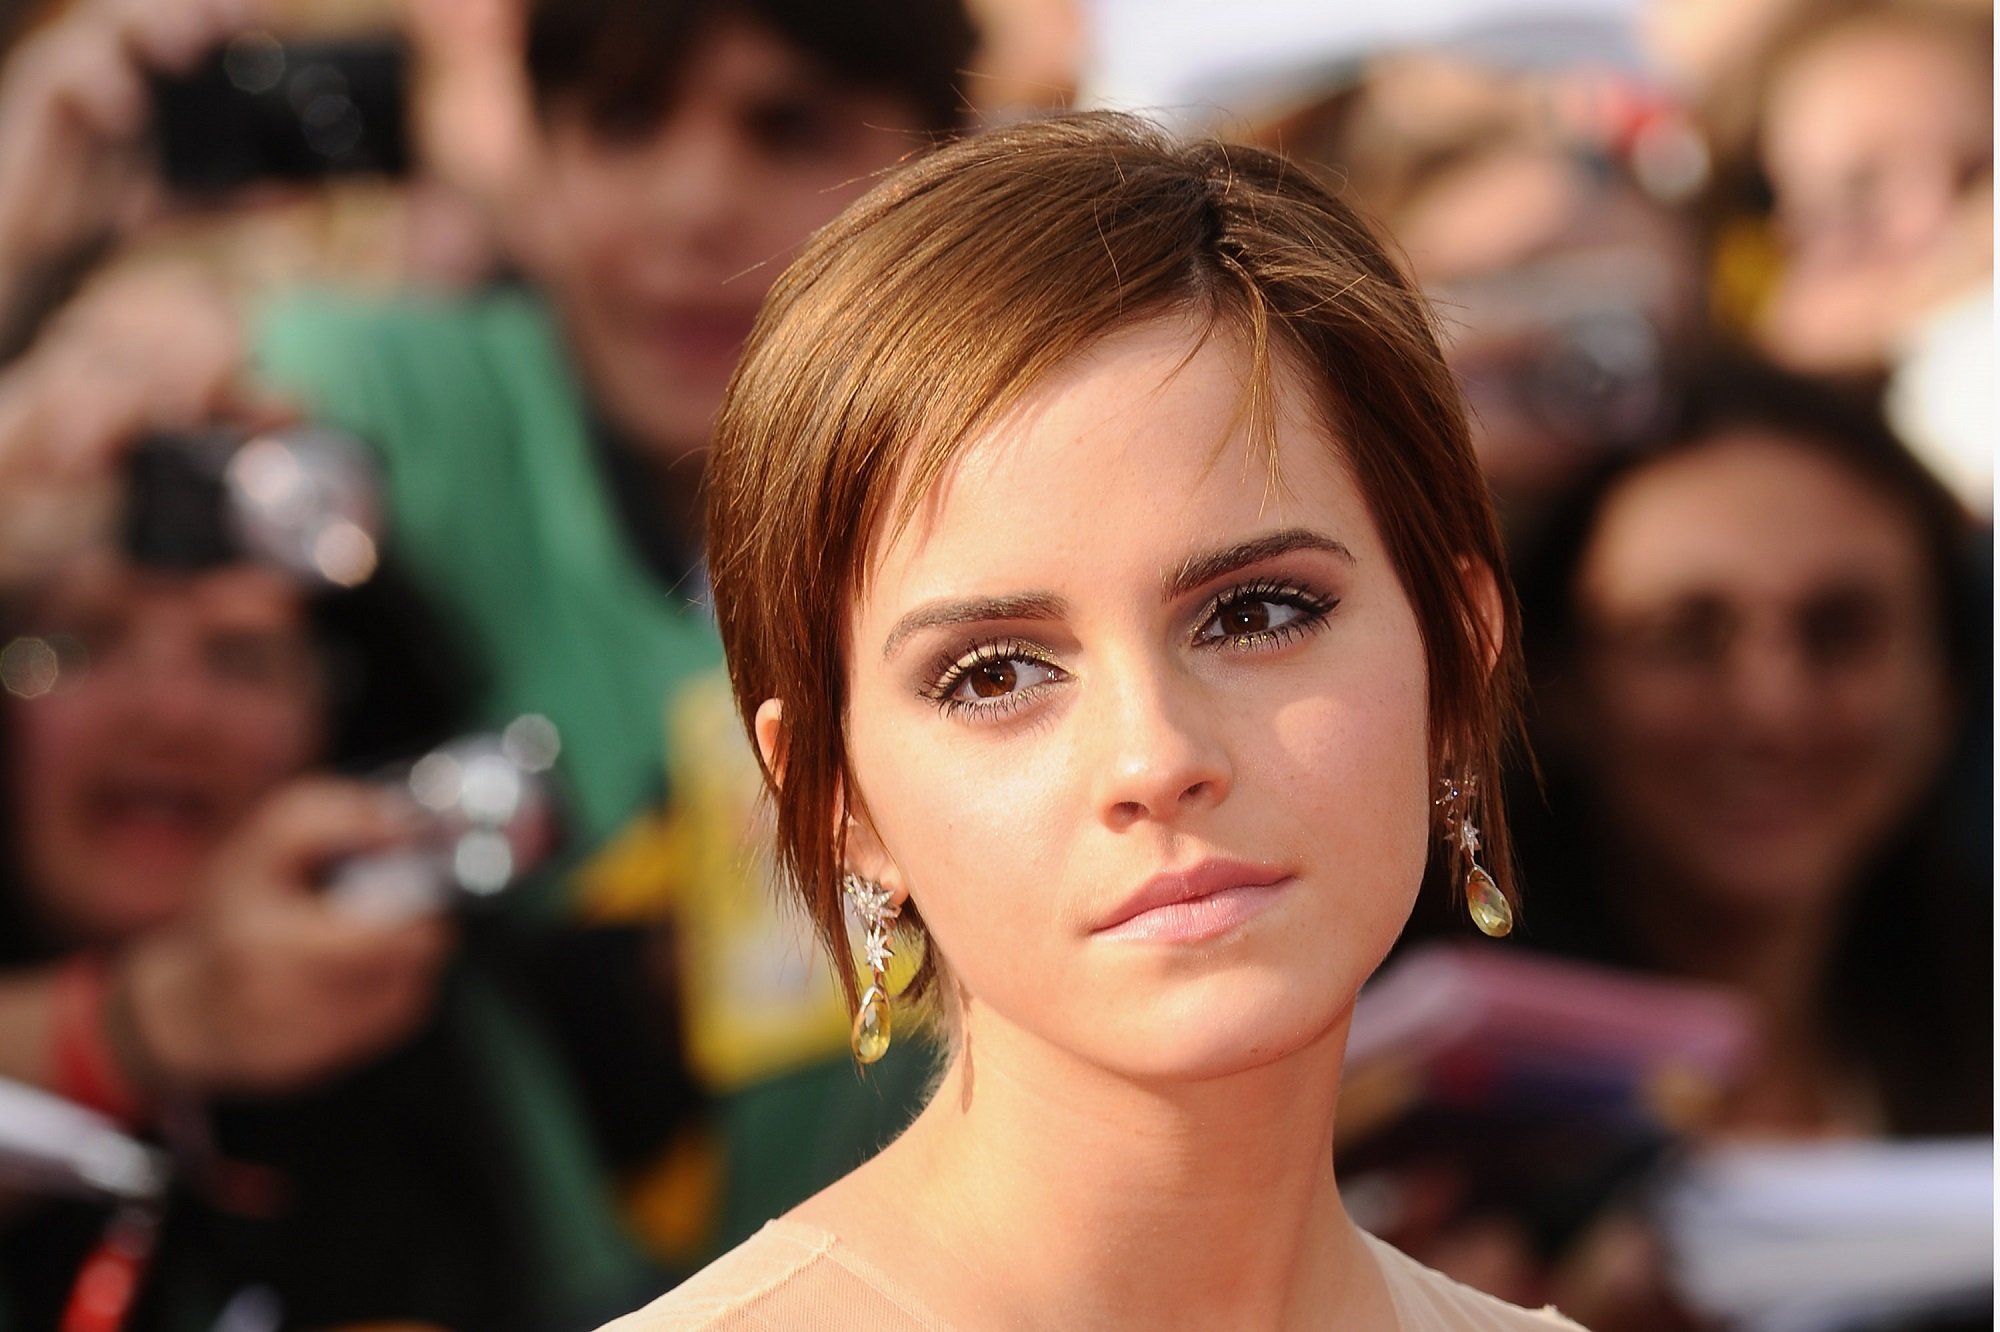 Emma Watson ‘Fell in Love’ With ‘Harry Potter’ Co-Star and On-Screen Rival But Claims Nothing ‘Ever Ever Ever Ever Happened Romantically’